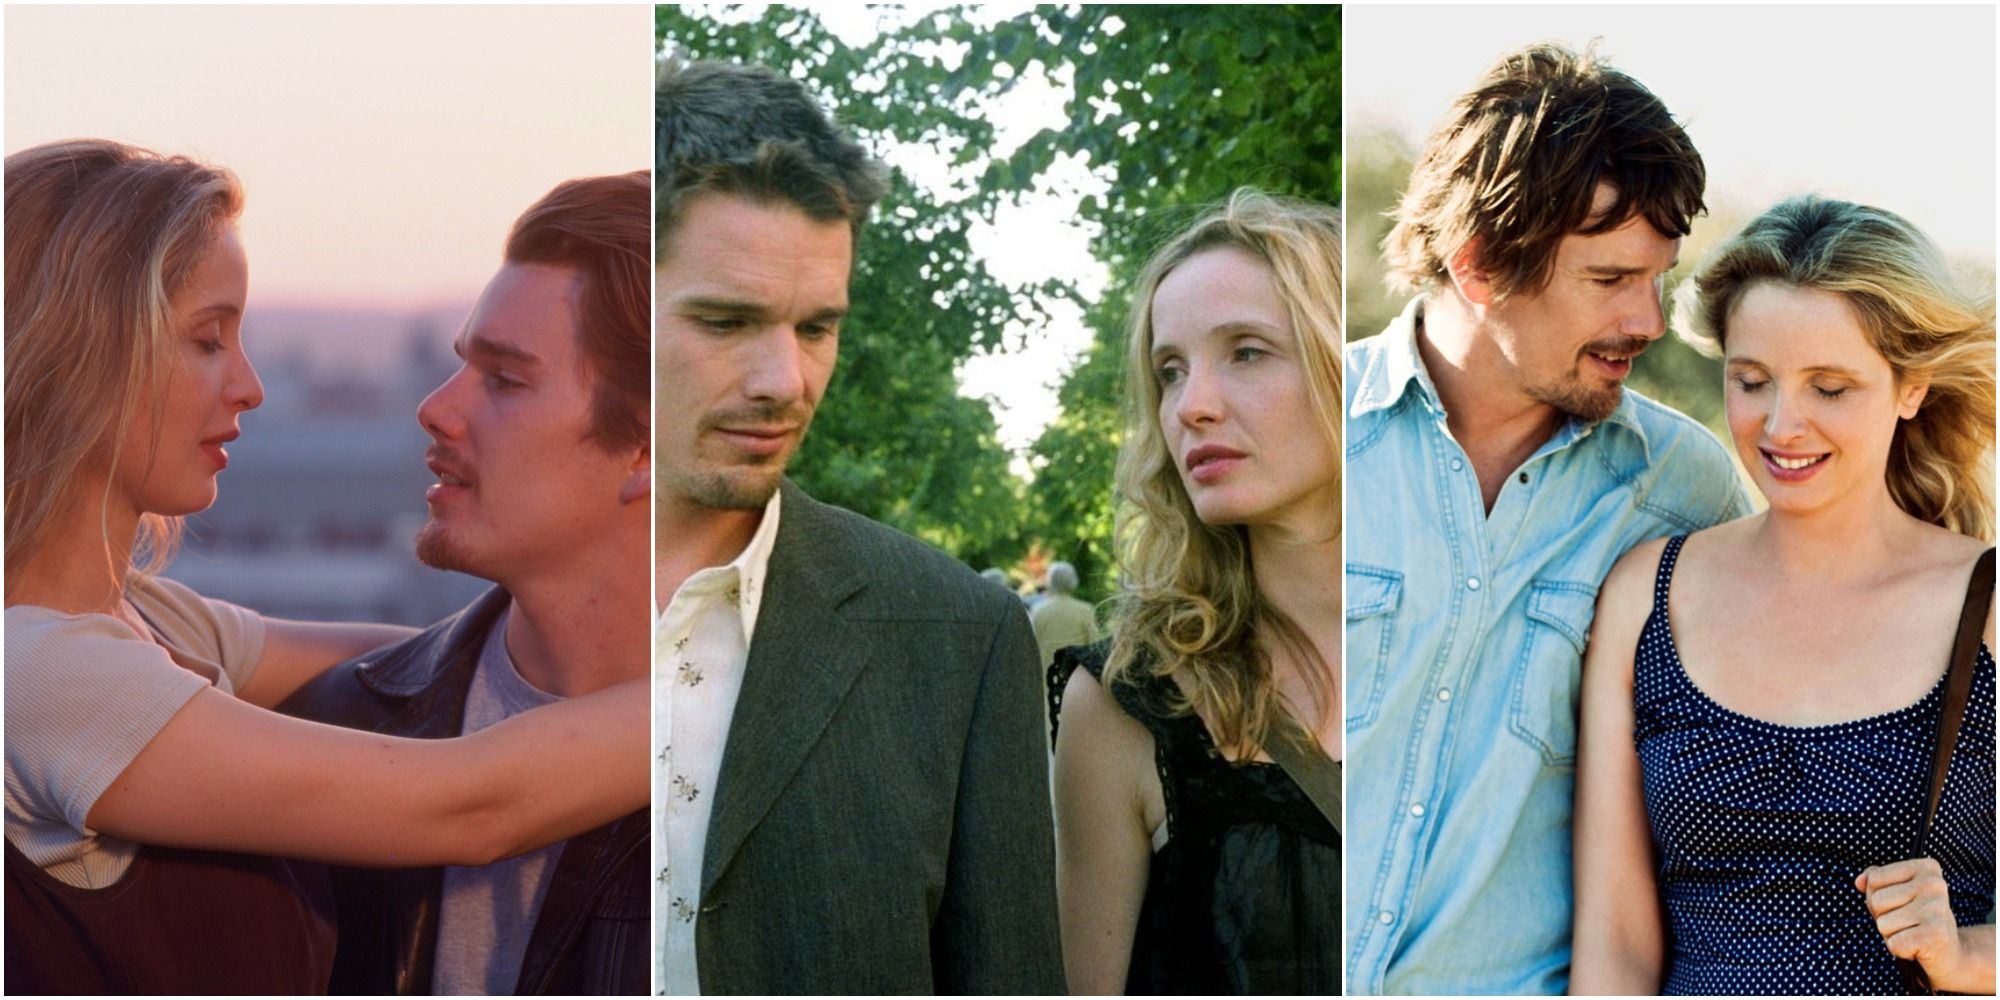 The-Before-Trilogy-Hawke-and-Delpy